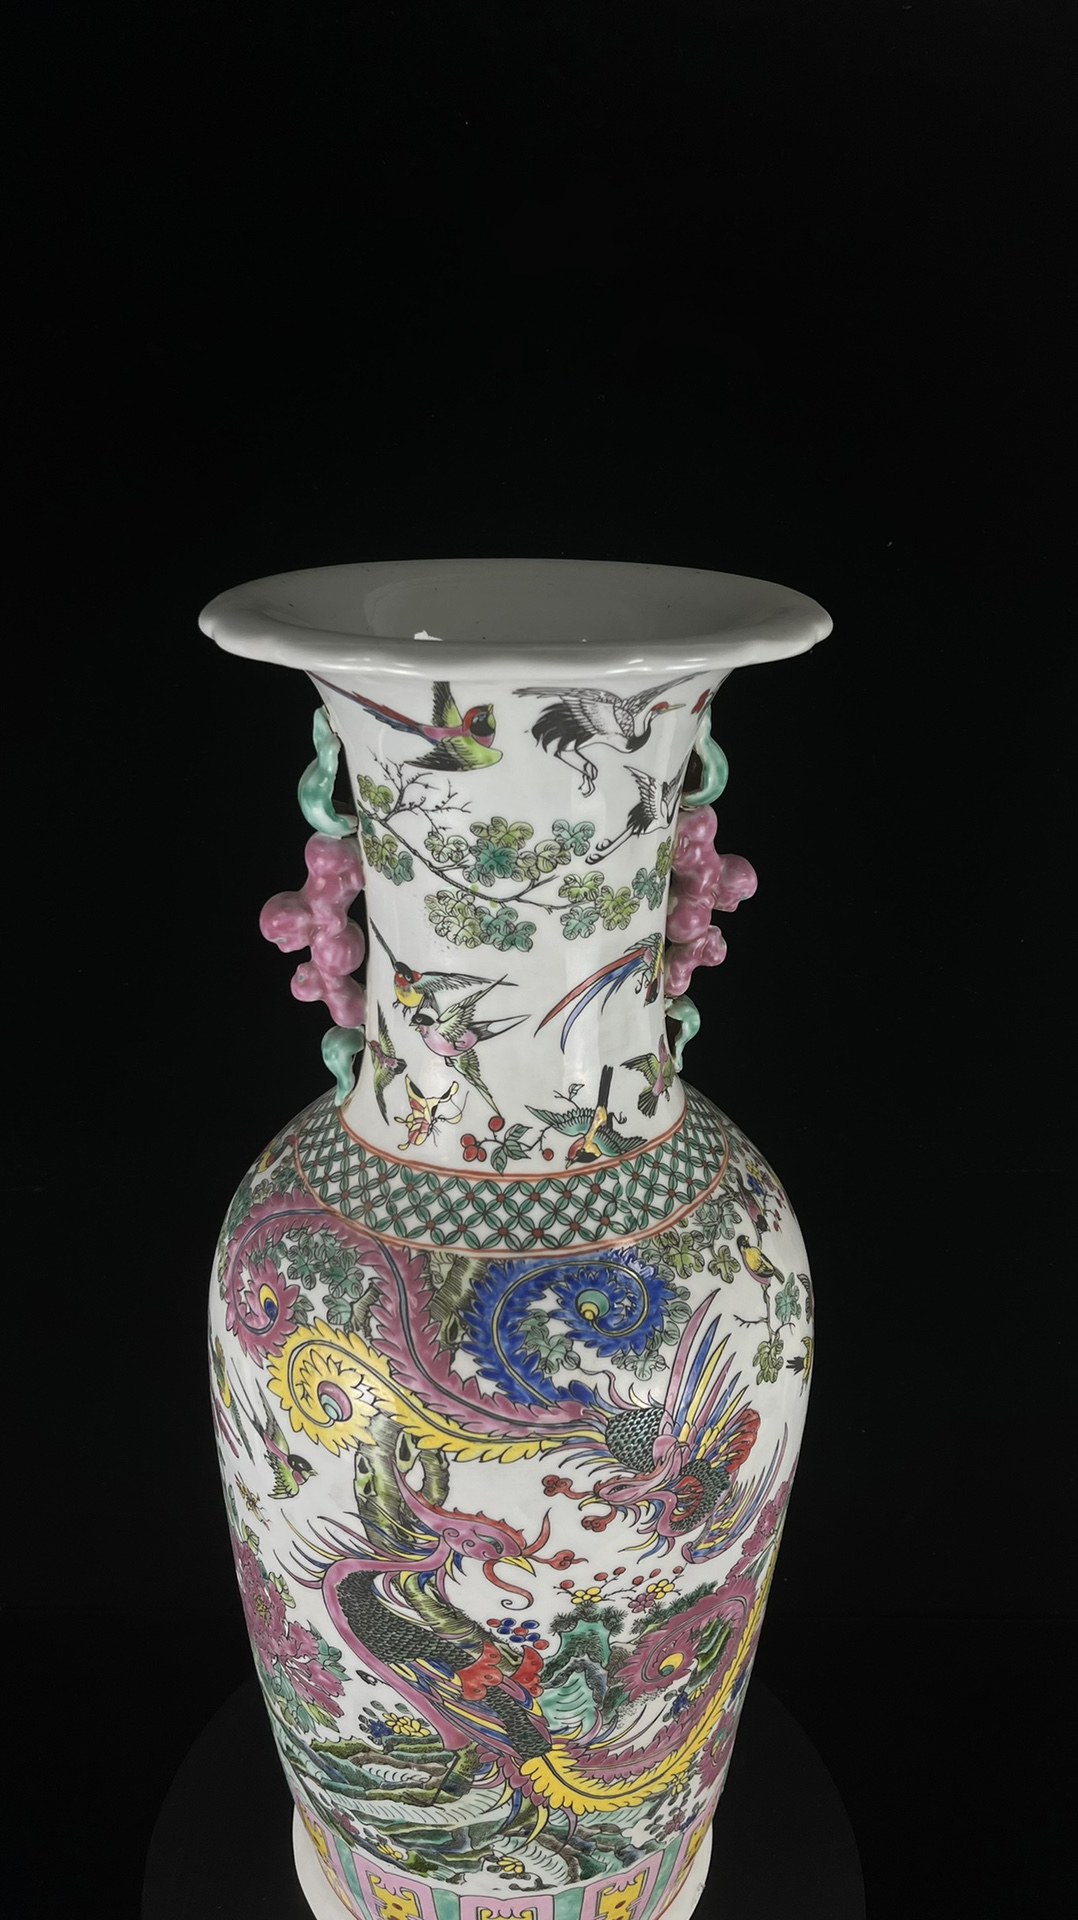 Large flower and bird vase made in the Kangxi period of the Qing Dynasty - Image 8 of 9